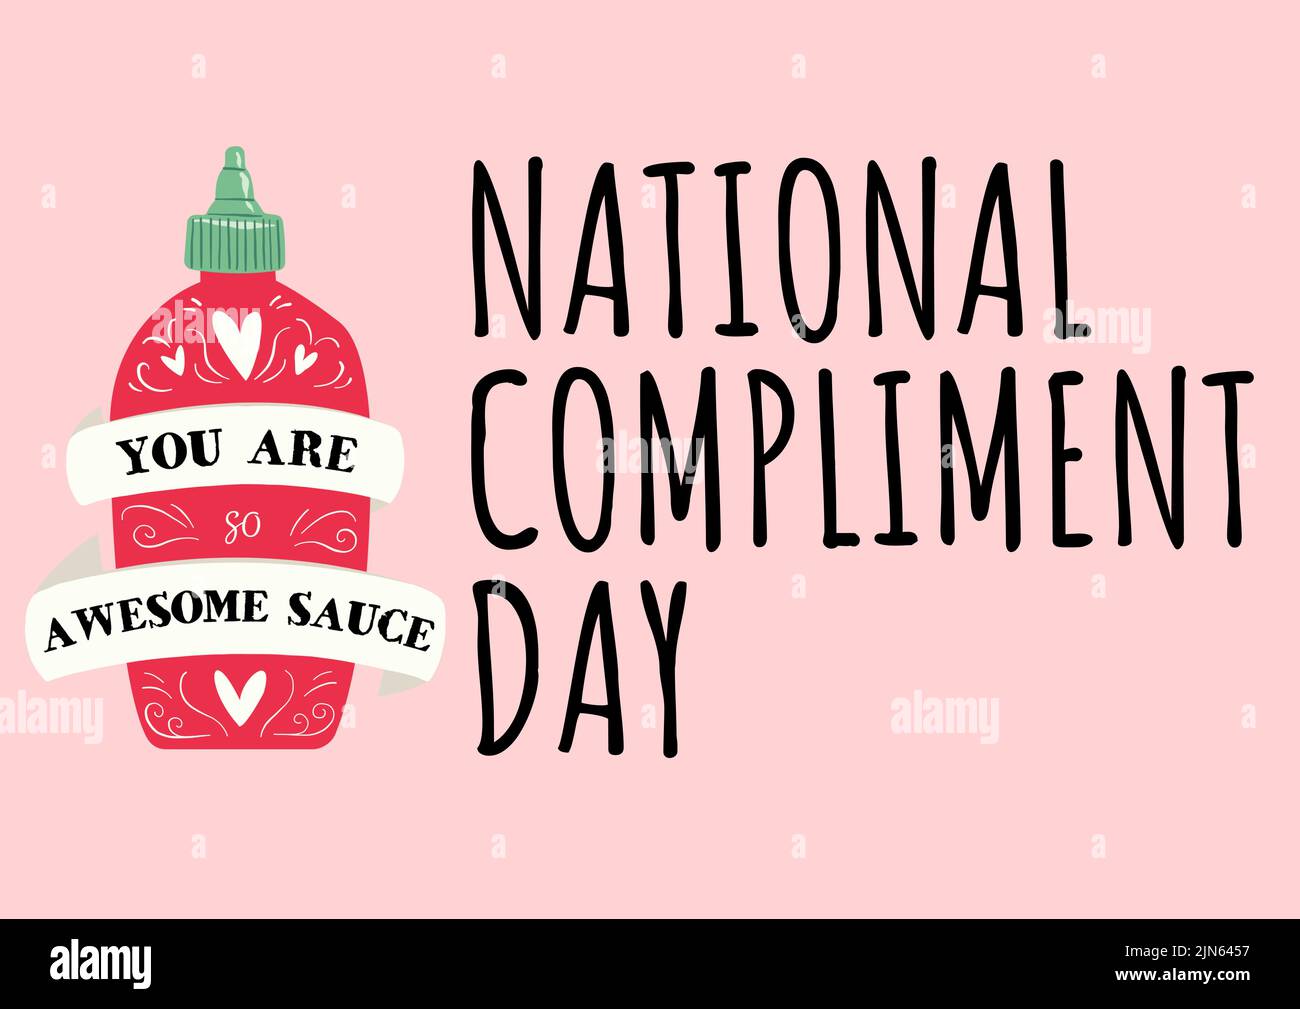 Composition of national compliment day text with bootle icon on pink backgorund Stock Photo